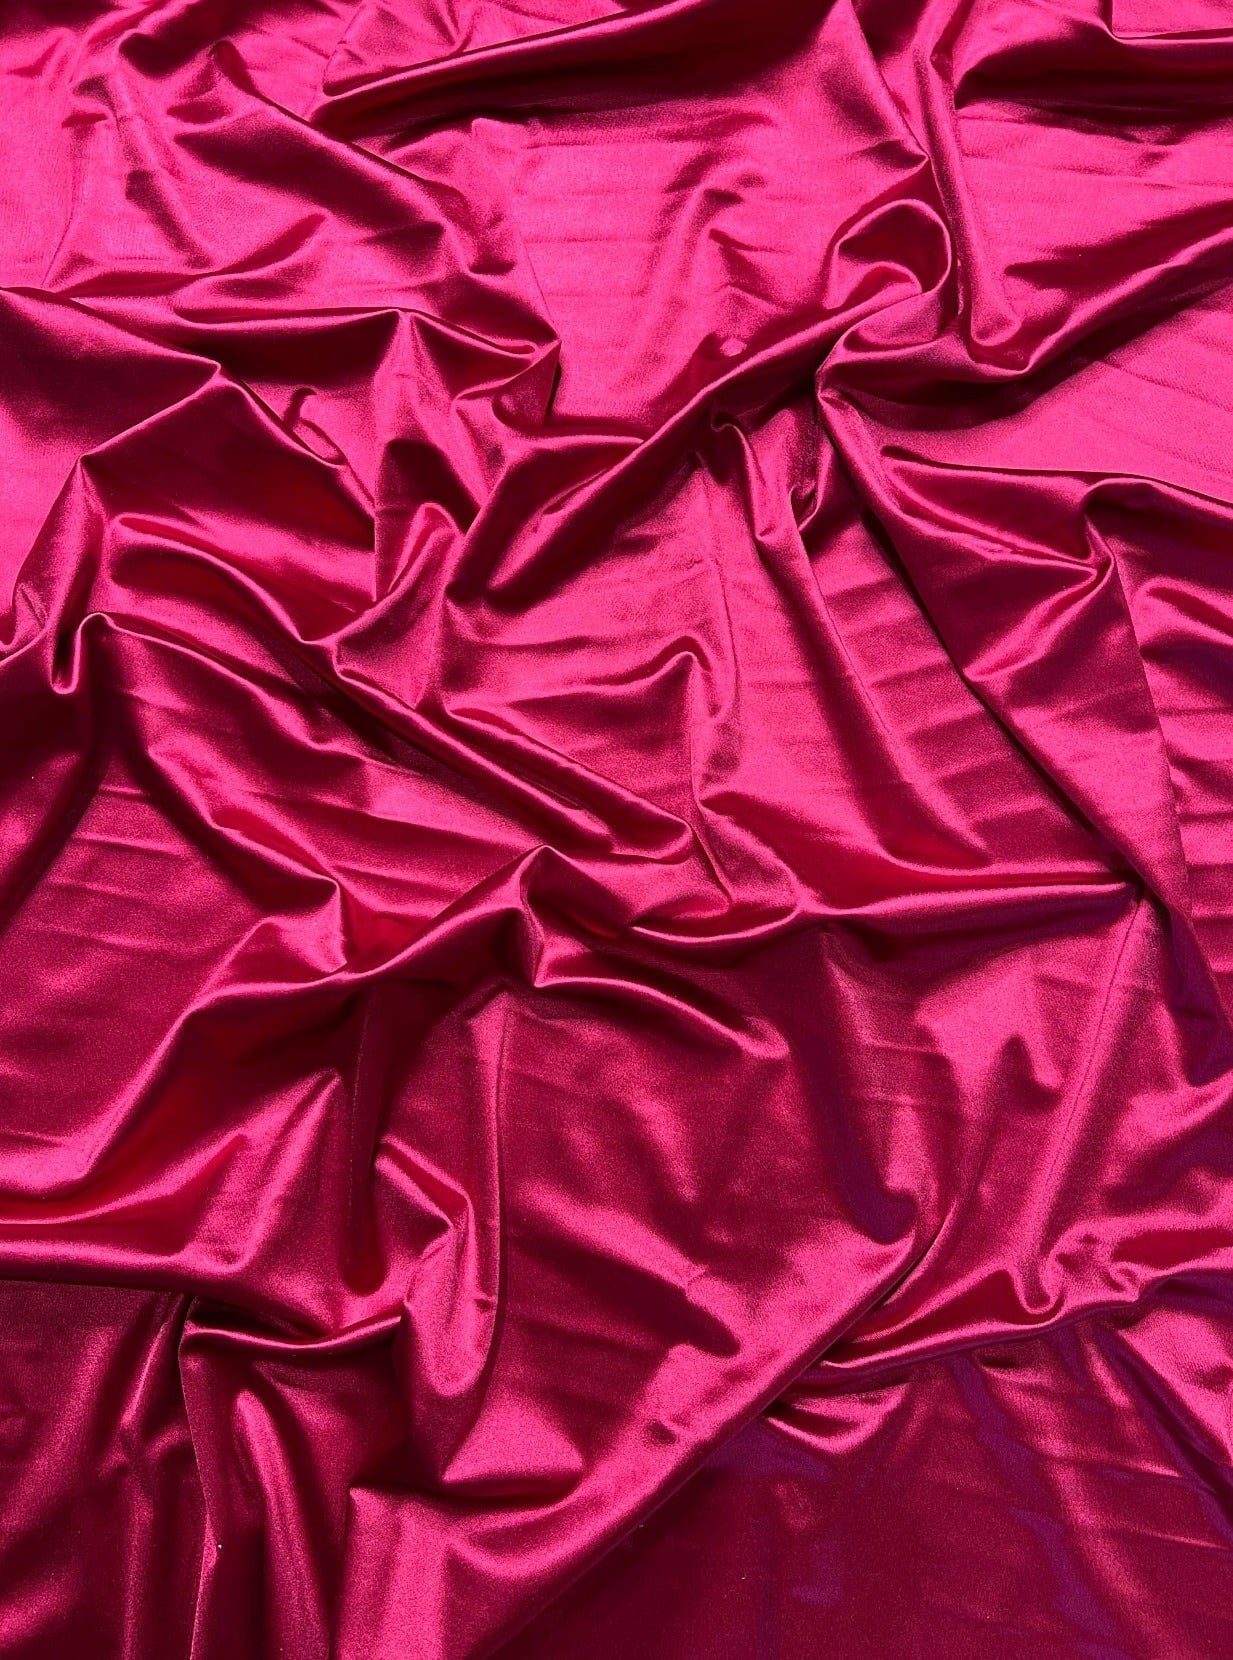 wine nylon spandex, wine red spandex, hot pink nylon spandex, pink fabric online, kiki textiles, fabric for leggings, wholesale fabric USA, shiny fabric, solid legging fabric, fabric for crafts, fabric for clothes, fabric for dress